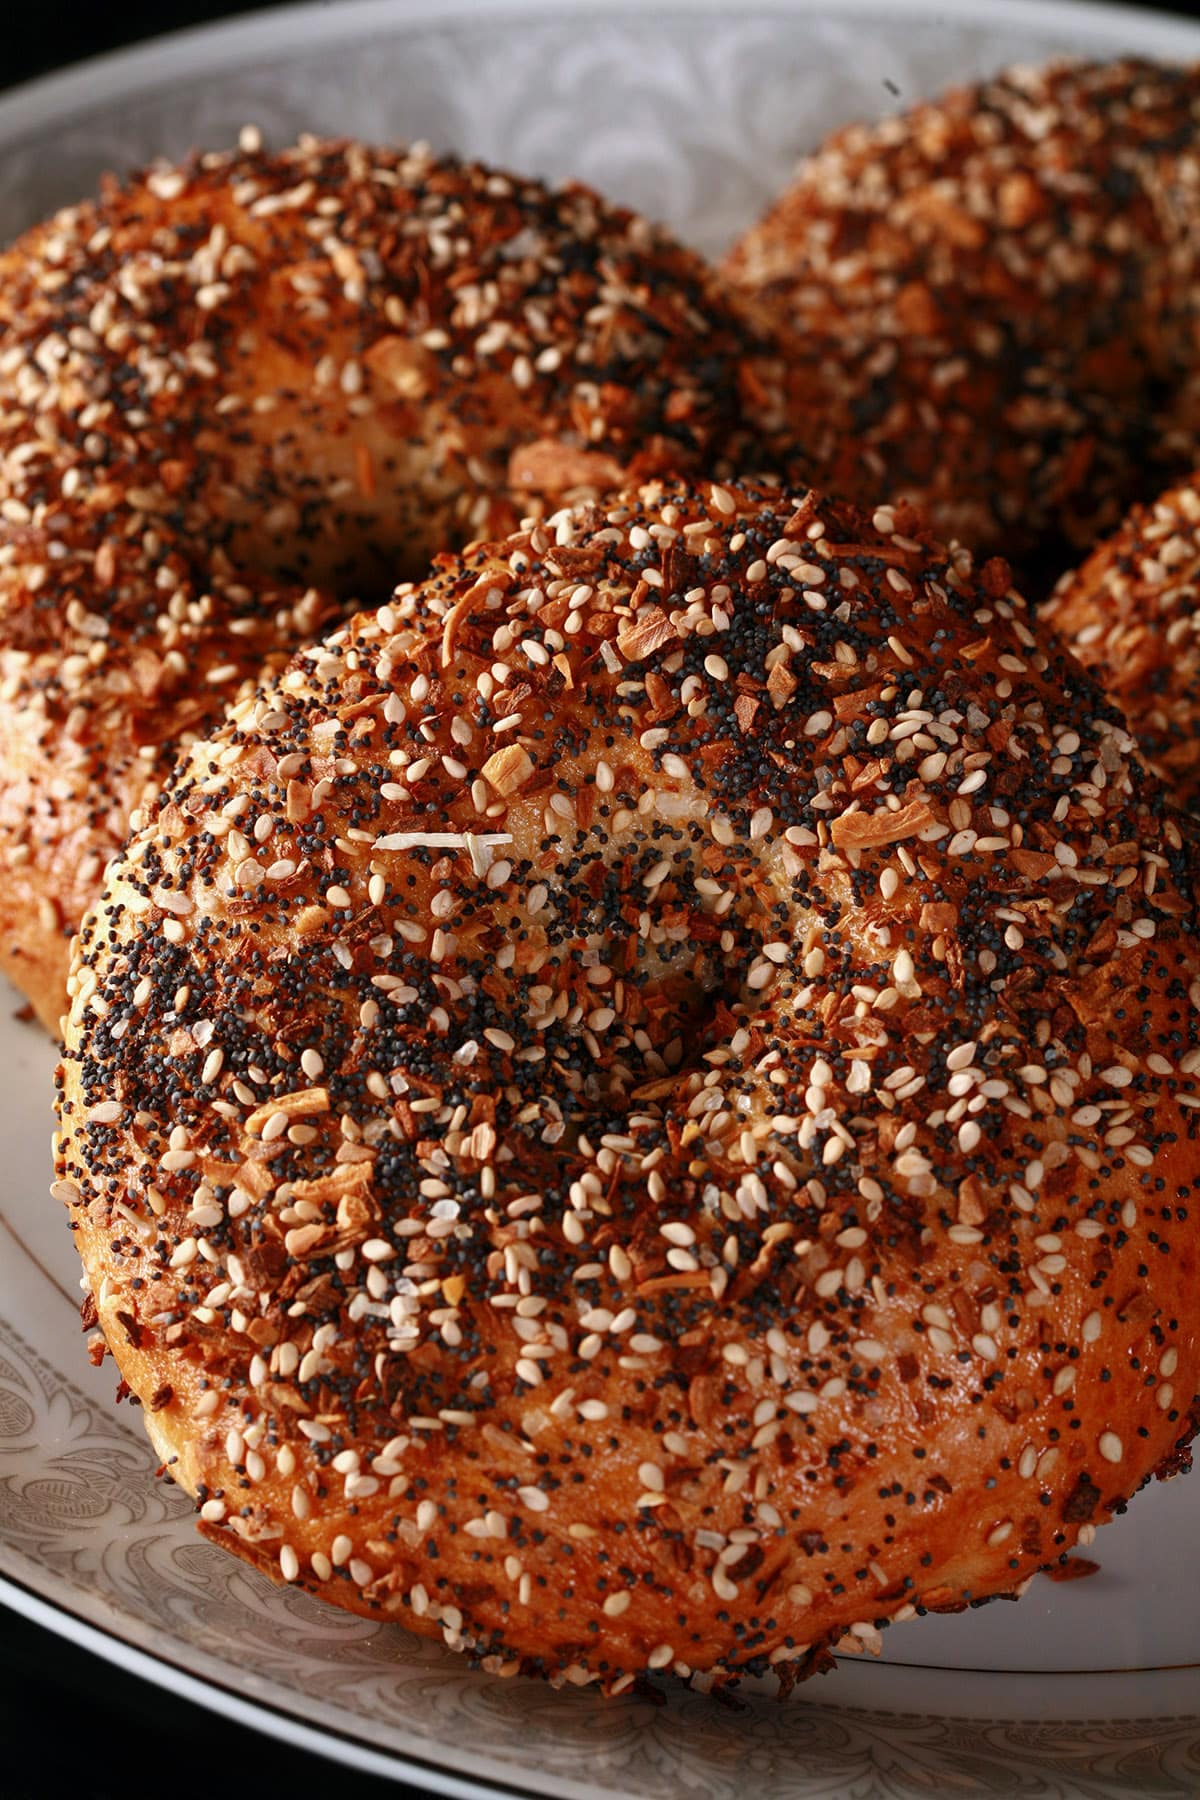 A plate of homemade everything seasoned bagels.